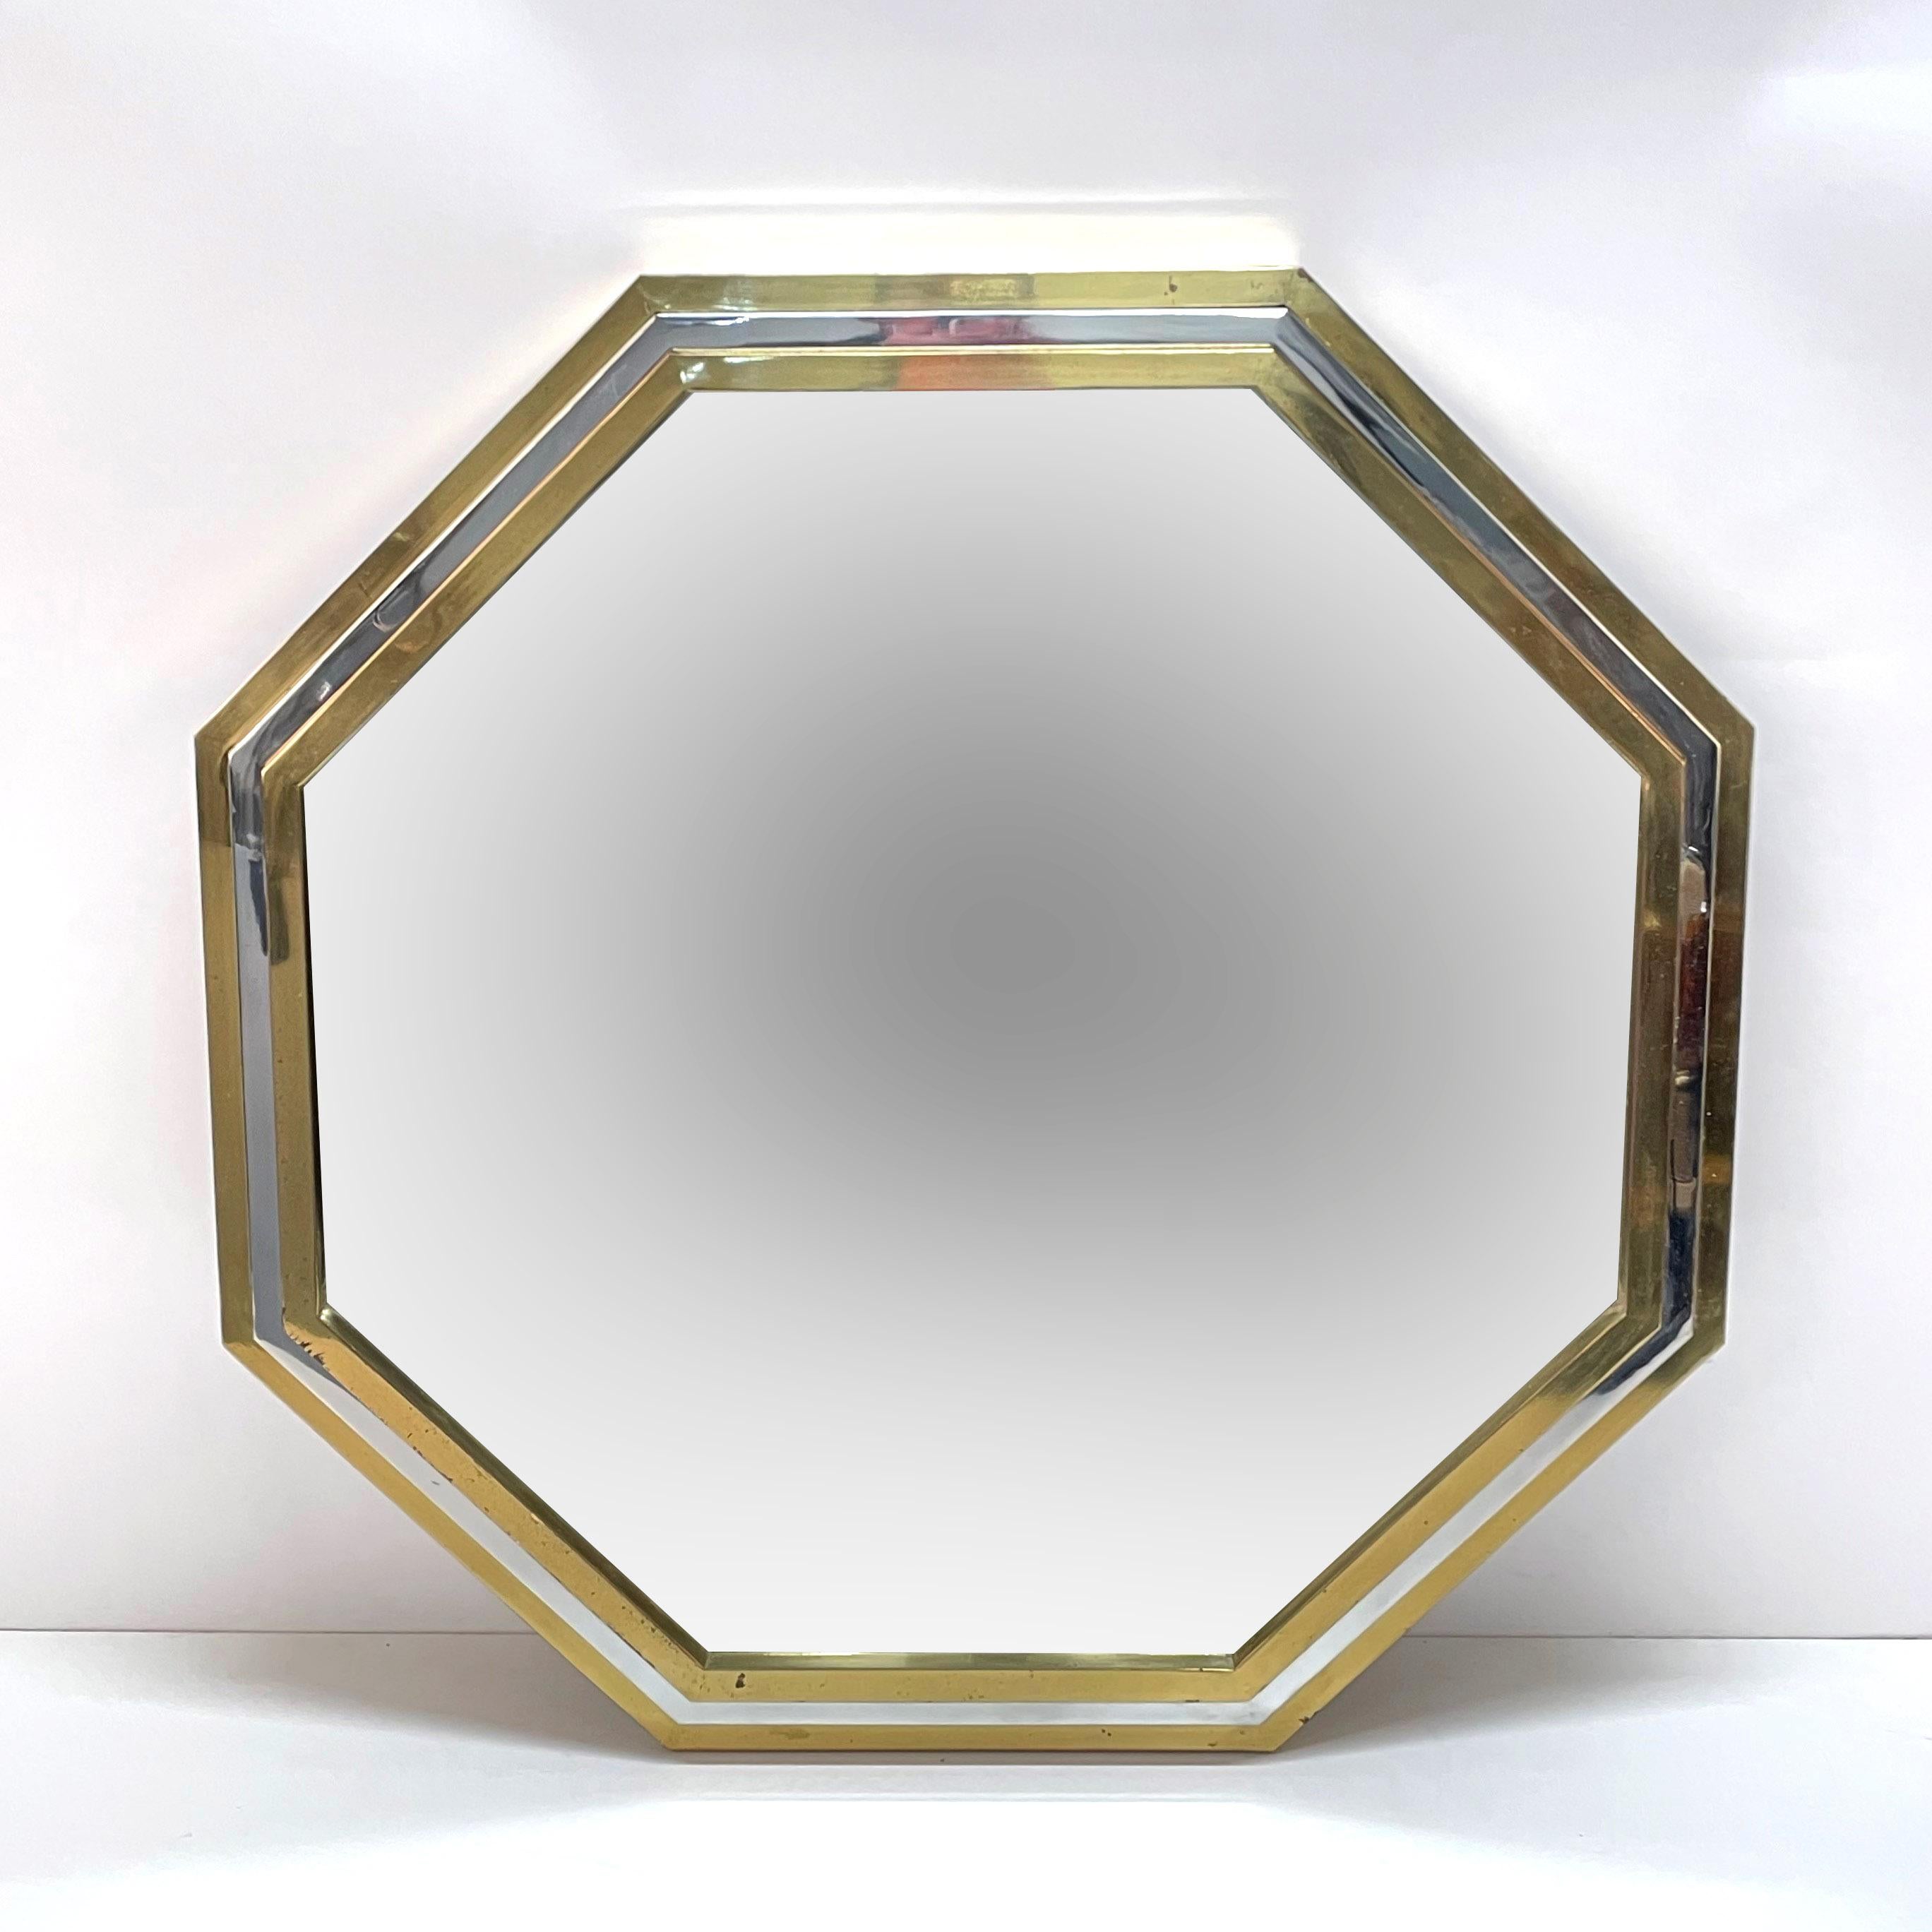 Magnificent and large midcentury octagonal mirror with brass and chromed brass frame. It was produced in Italy during 1970s and it is attributed to Willy Rizzo.

Its uniqueness is due to the wonderful triple-layer frame: it is made of two layers